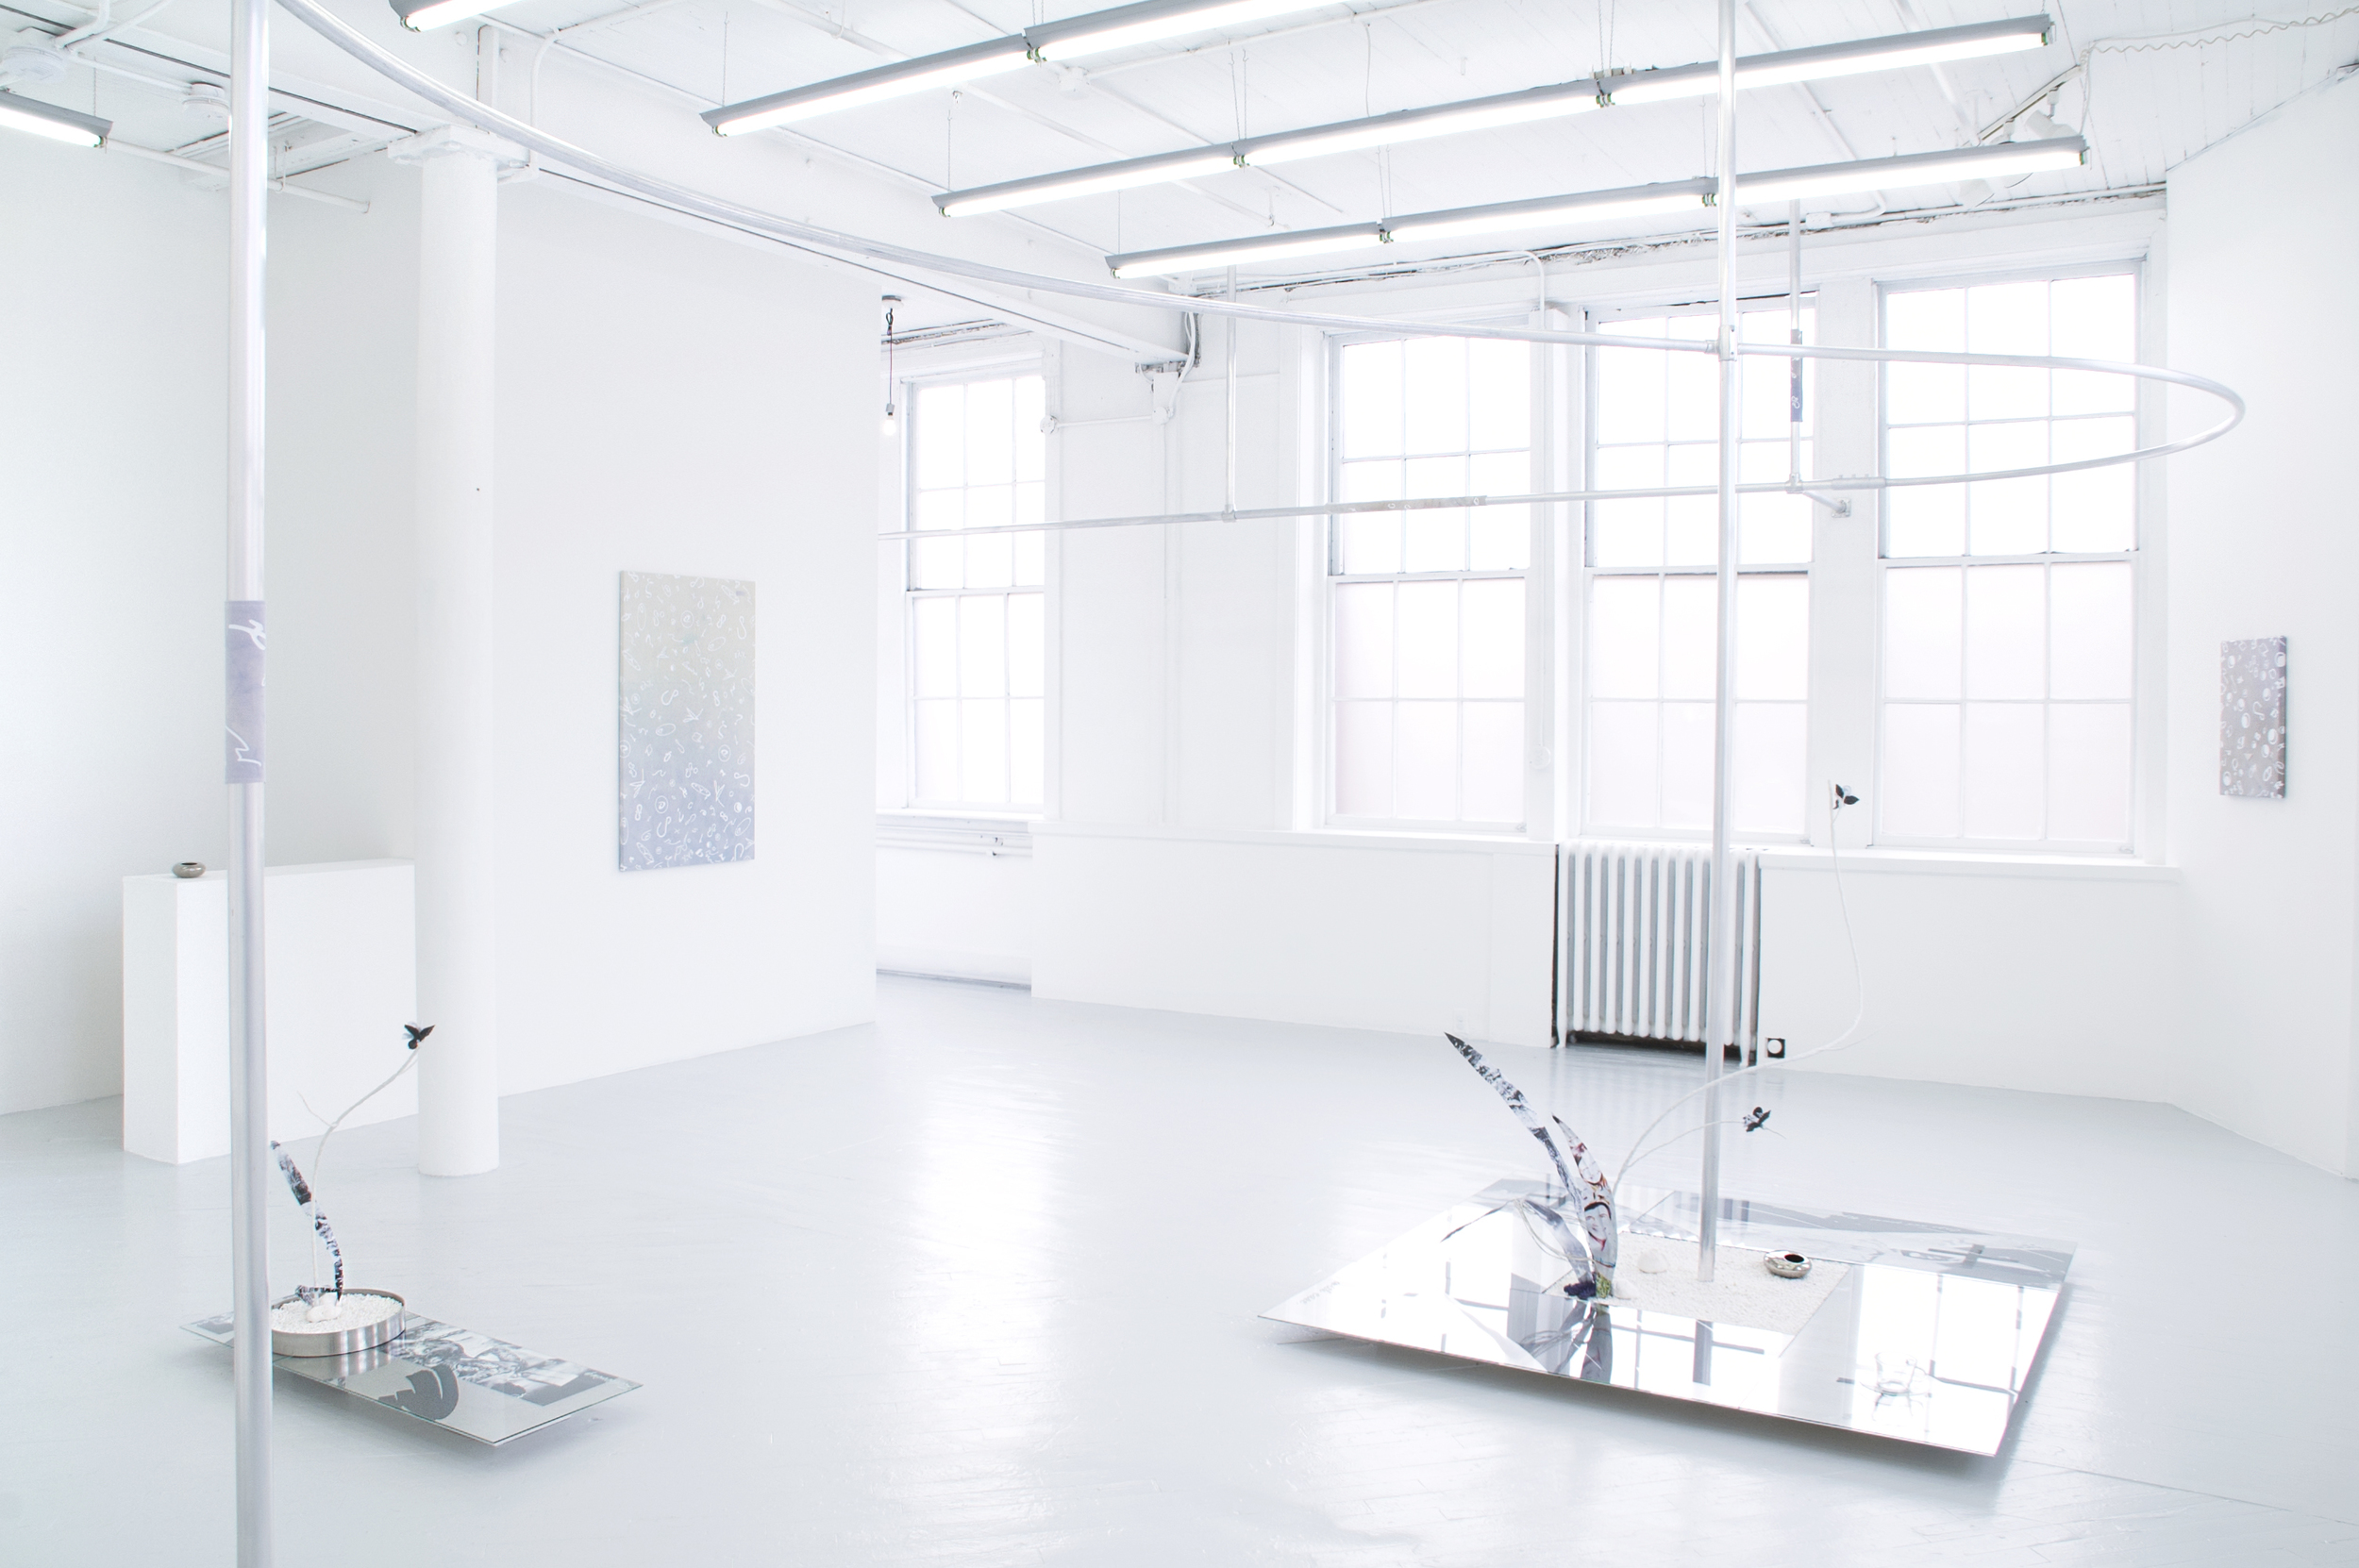  Installation view of  Jardin N°19  with Erika Ceruzzi at Springsteen Gallery, Baltimore 